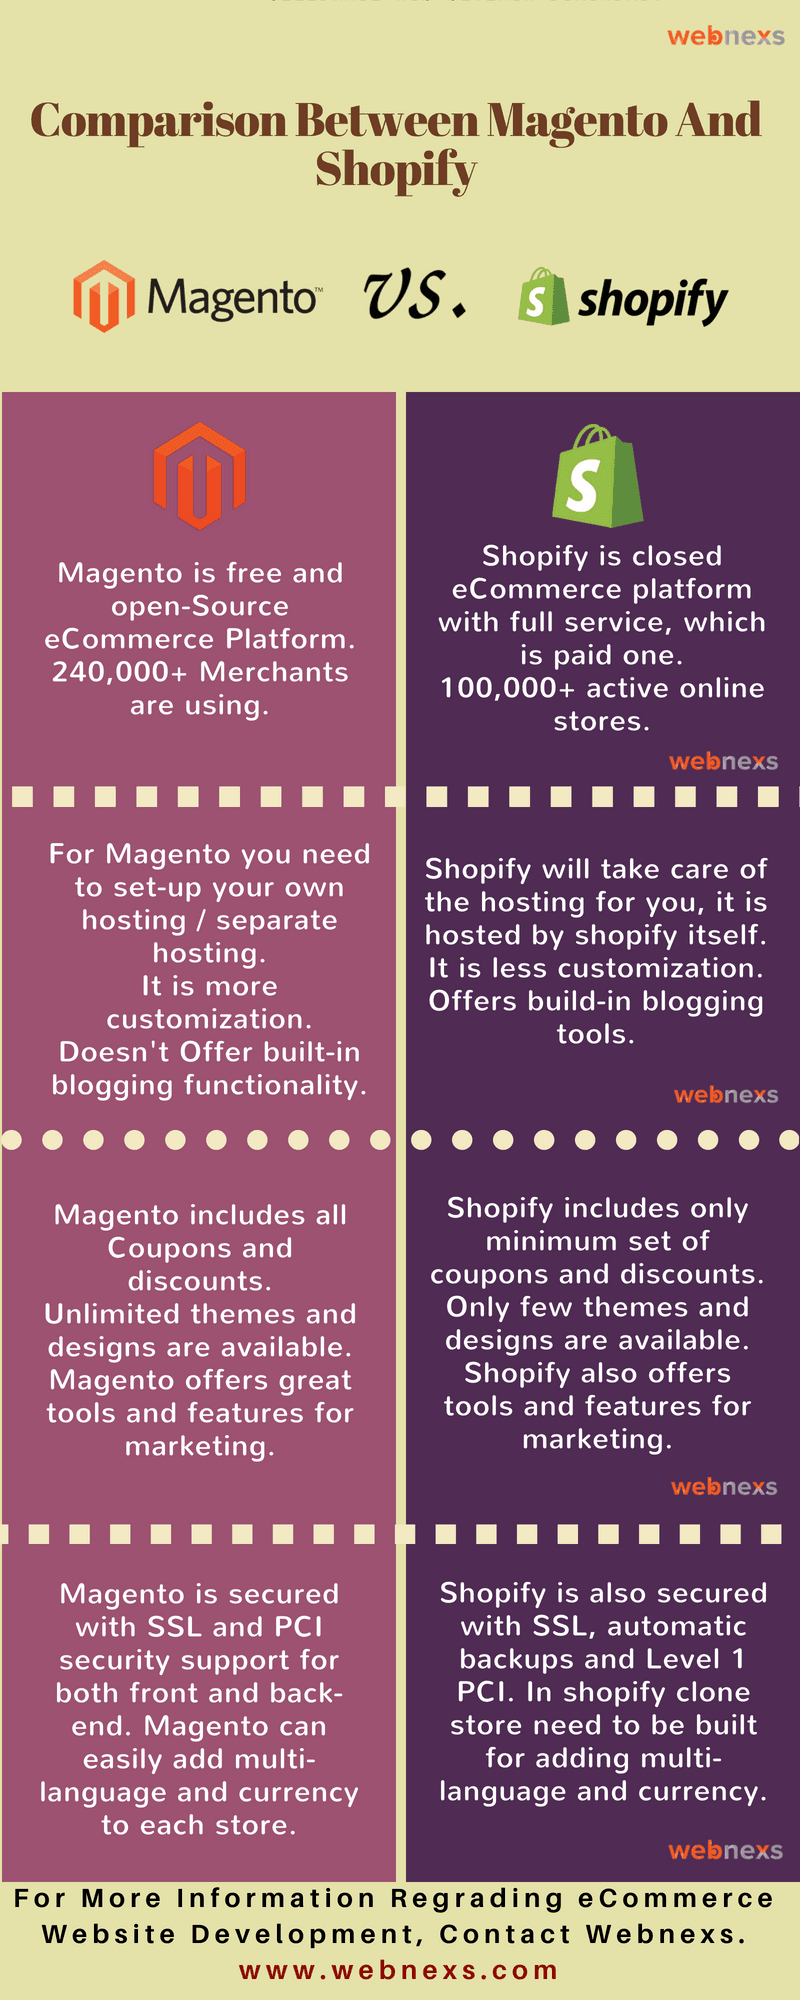 Magento 2 And Shopify: A good comparison